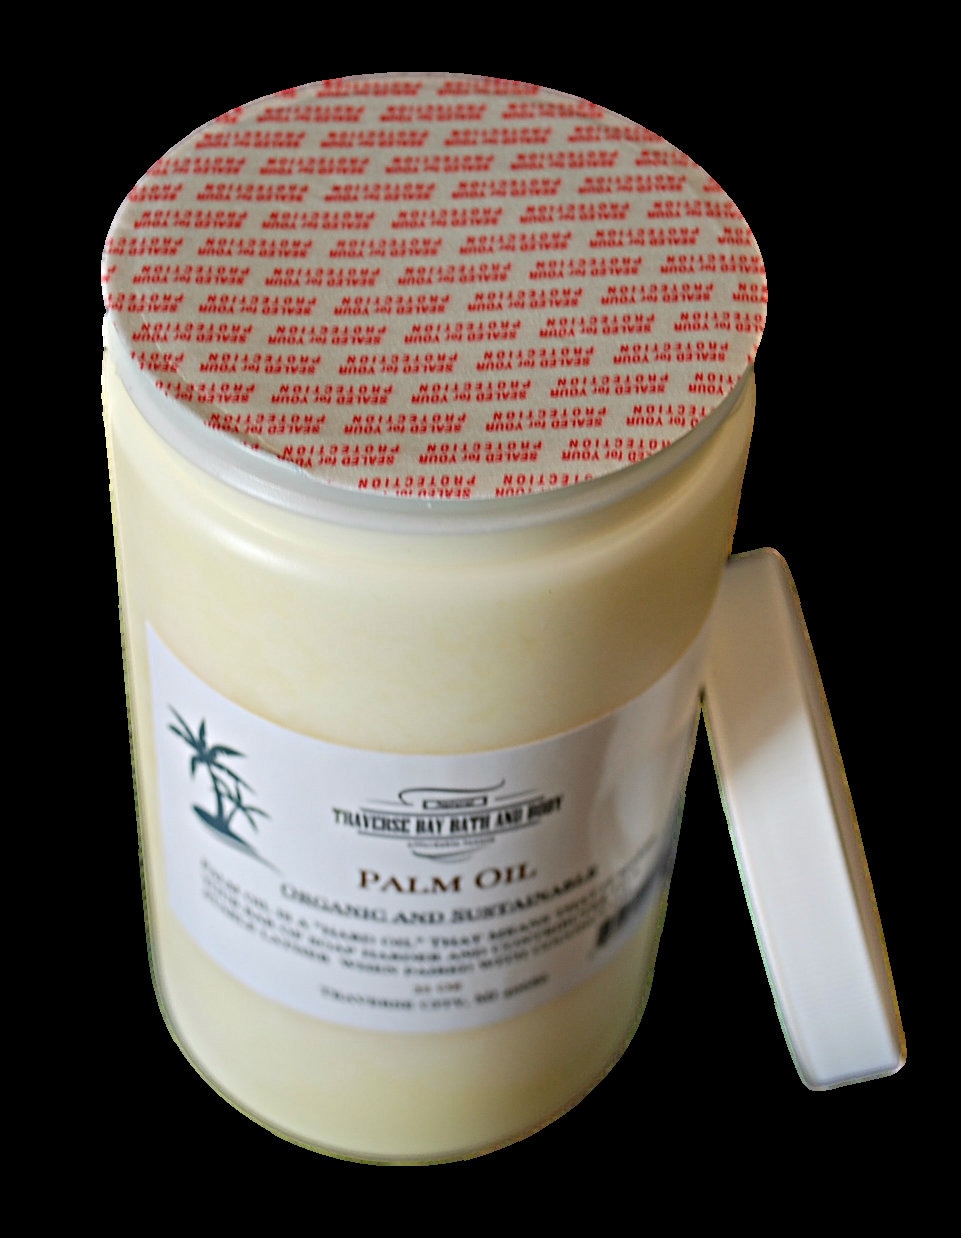 Palm Oil, Soap Making Supplies. Organic, Sustainable, Kosher, 32 fl oz. DIY Projects.